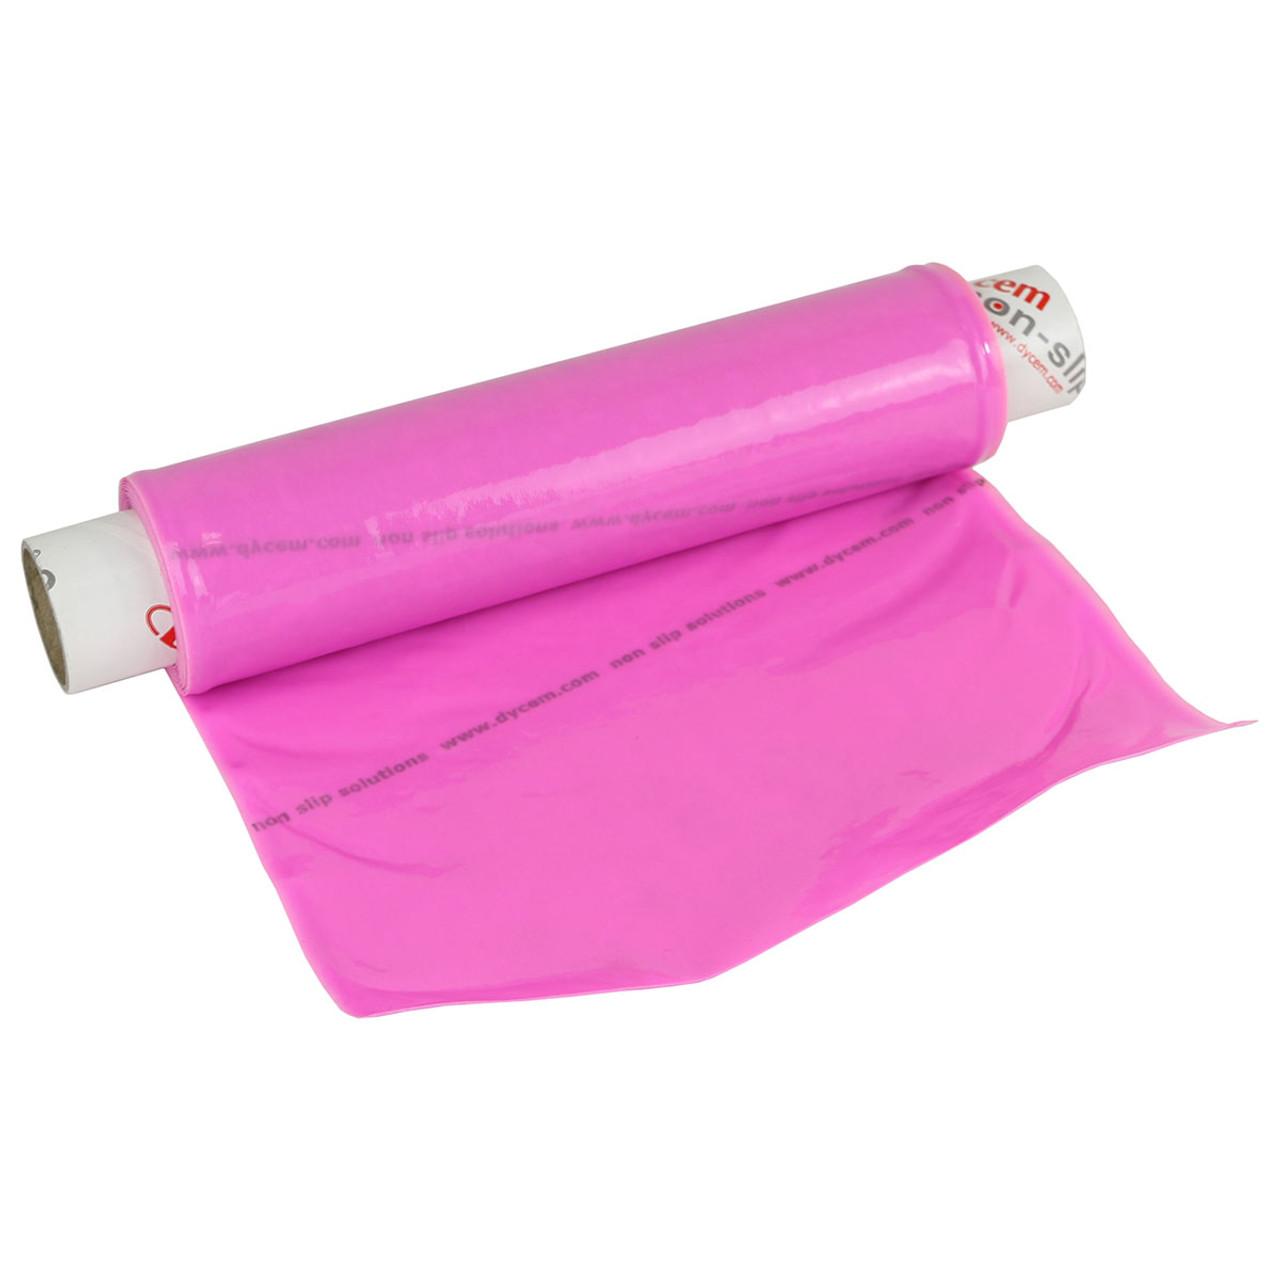 Dycem¨ non-slip material, roll, 8"x6-1/2 foot, pink